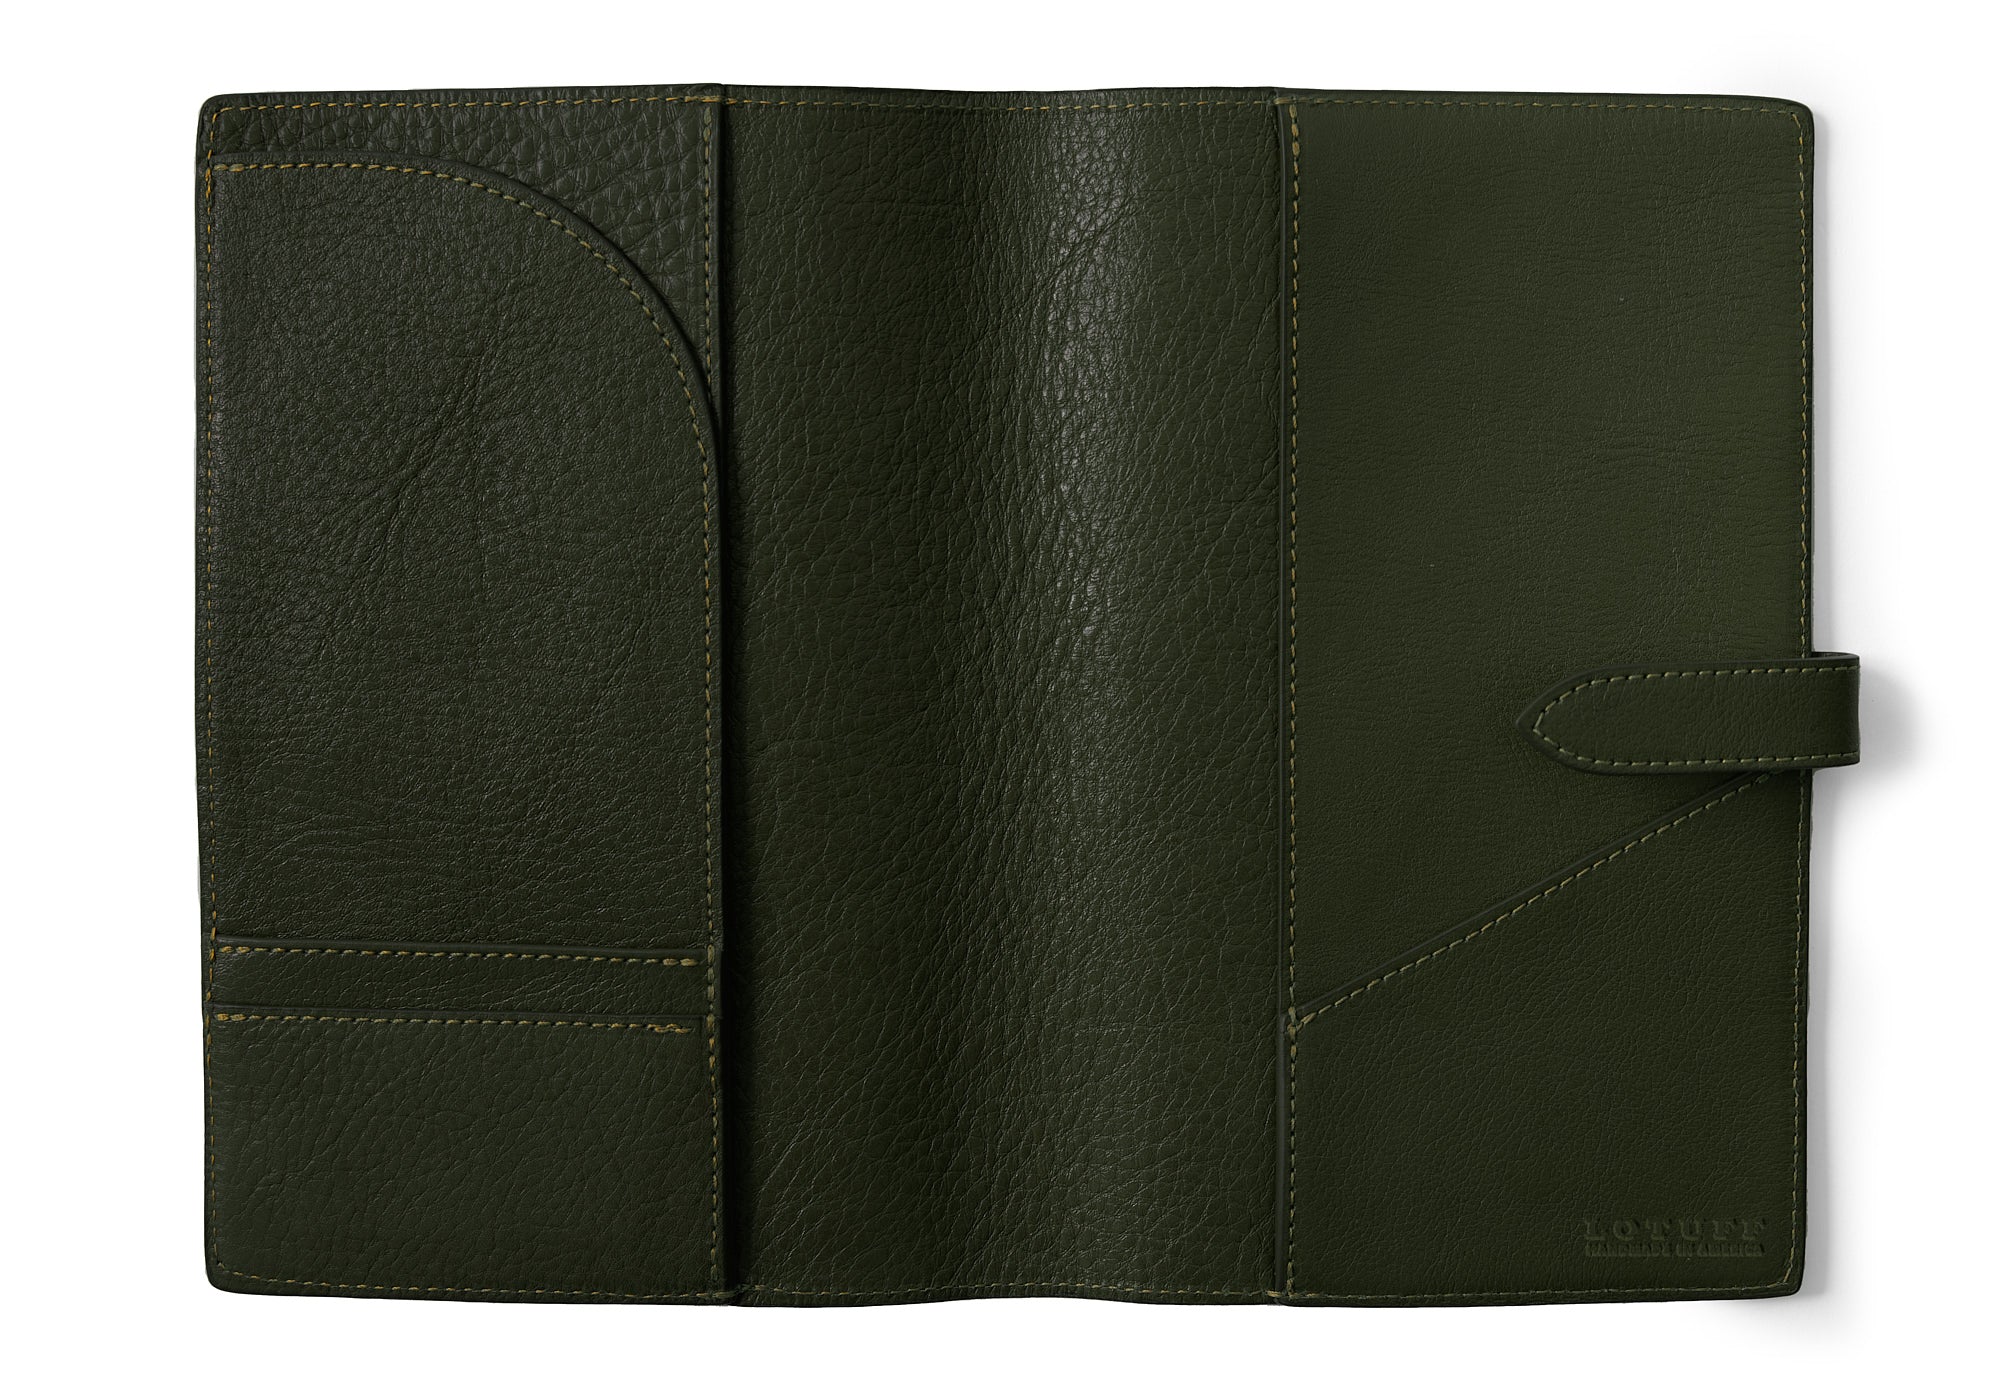 Top of Leather Travel Journal Olive